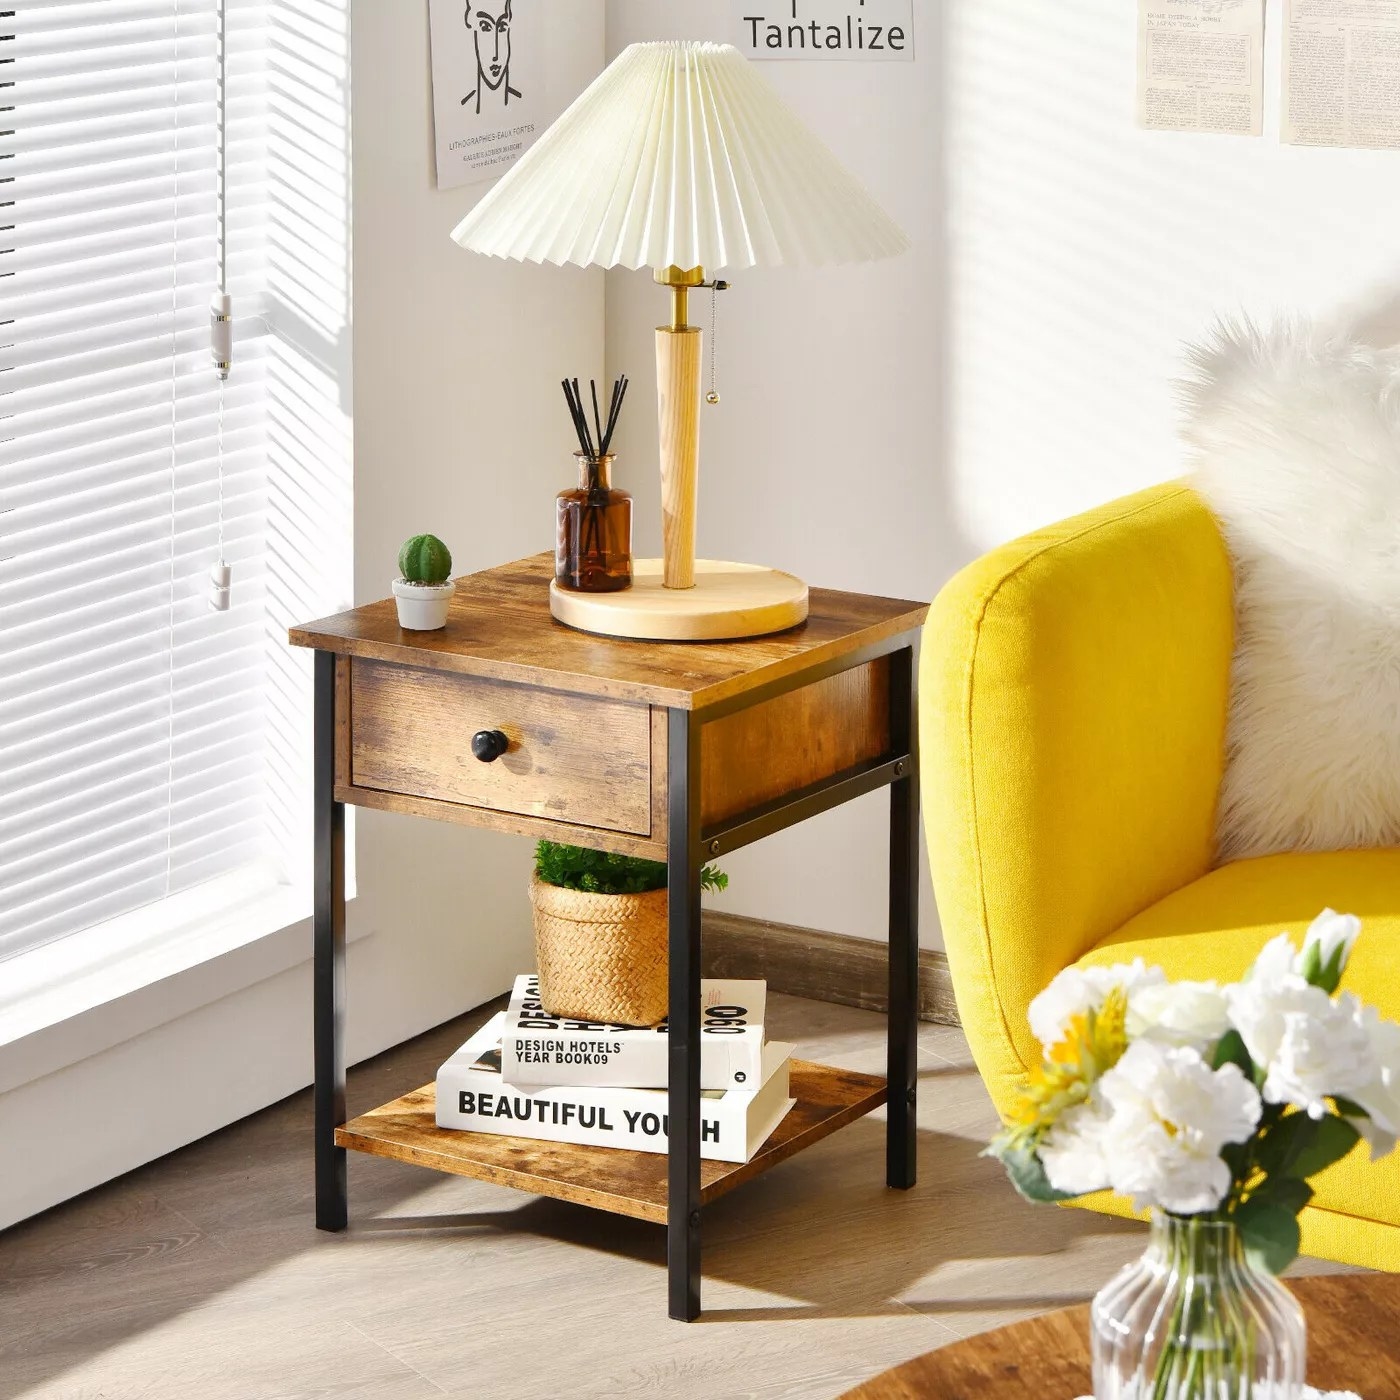 The rustic brown and black end table